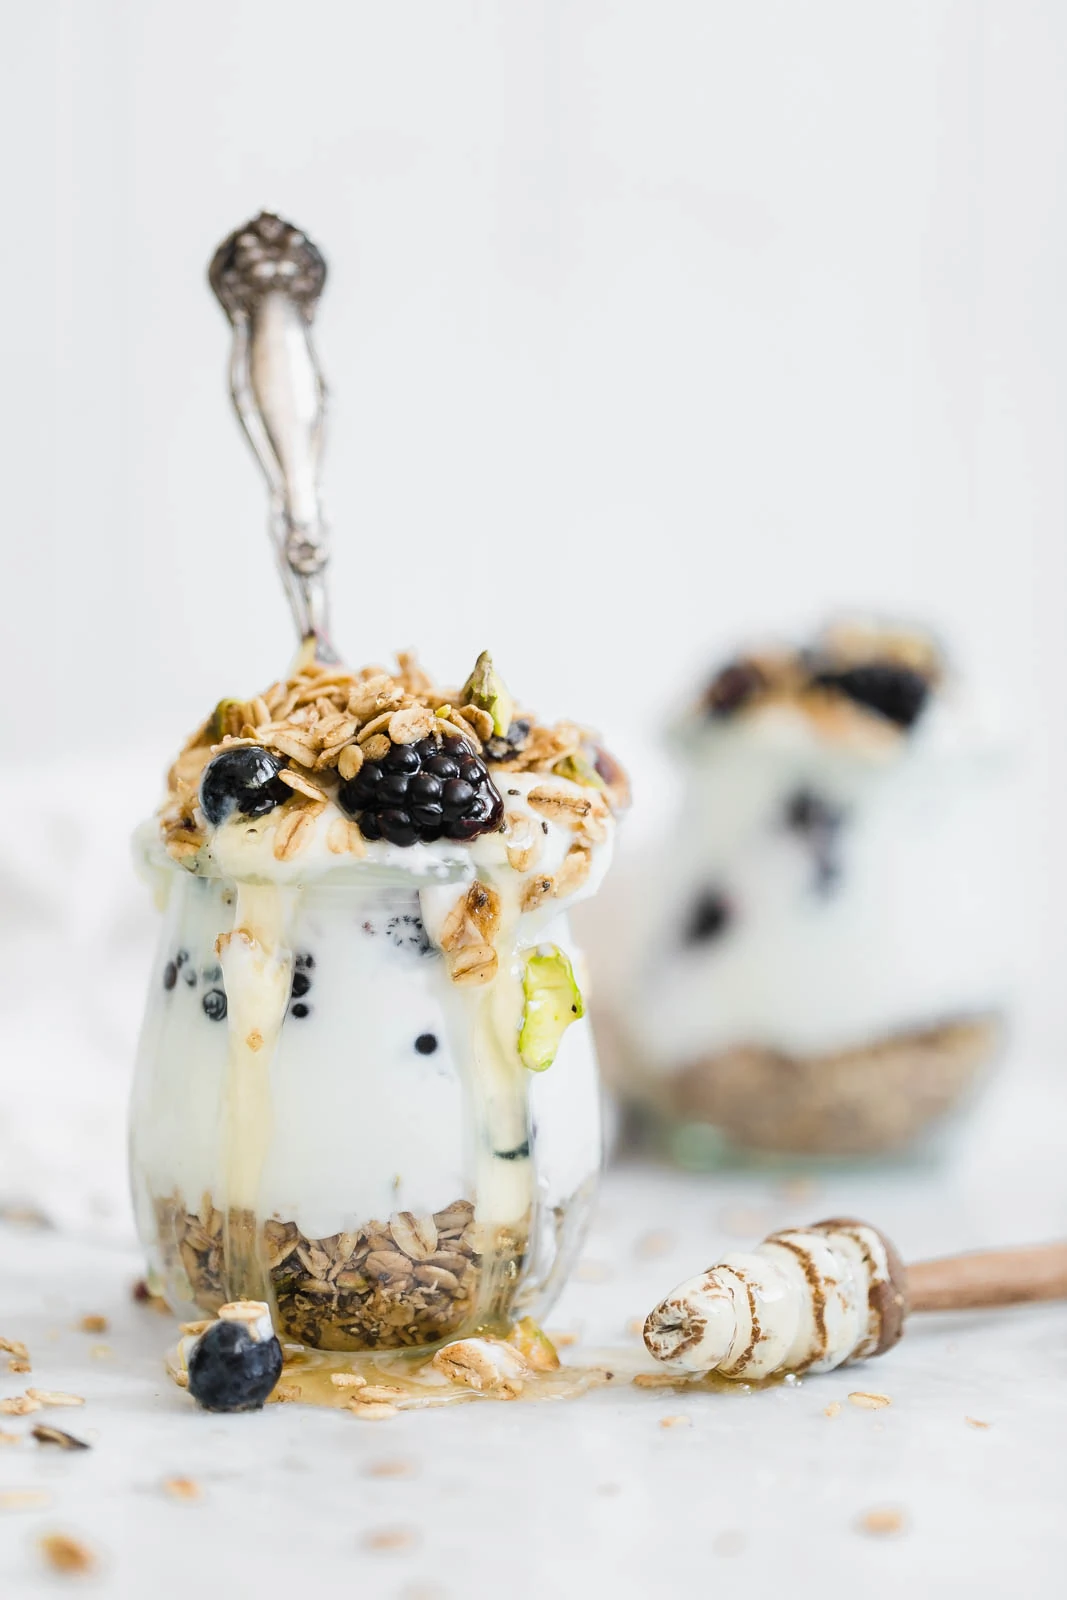 Cardamom Granola Parfait topped with honey and berries